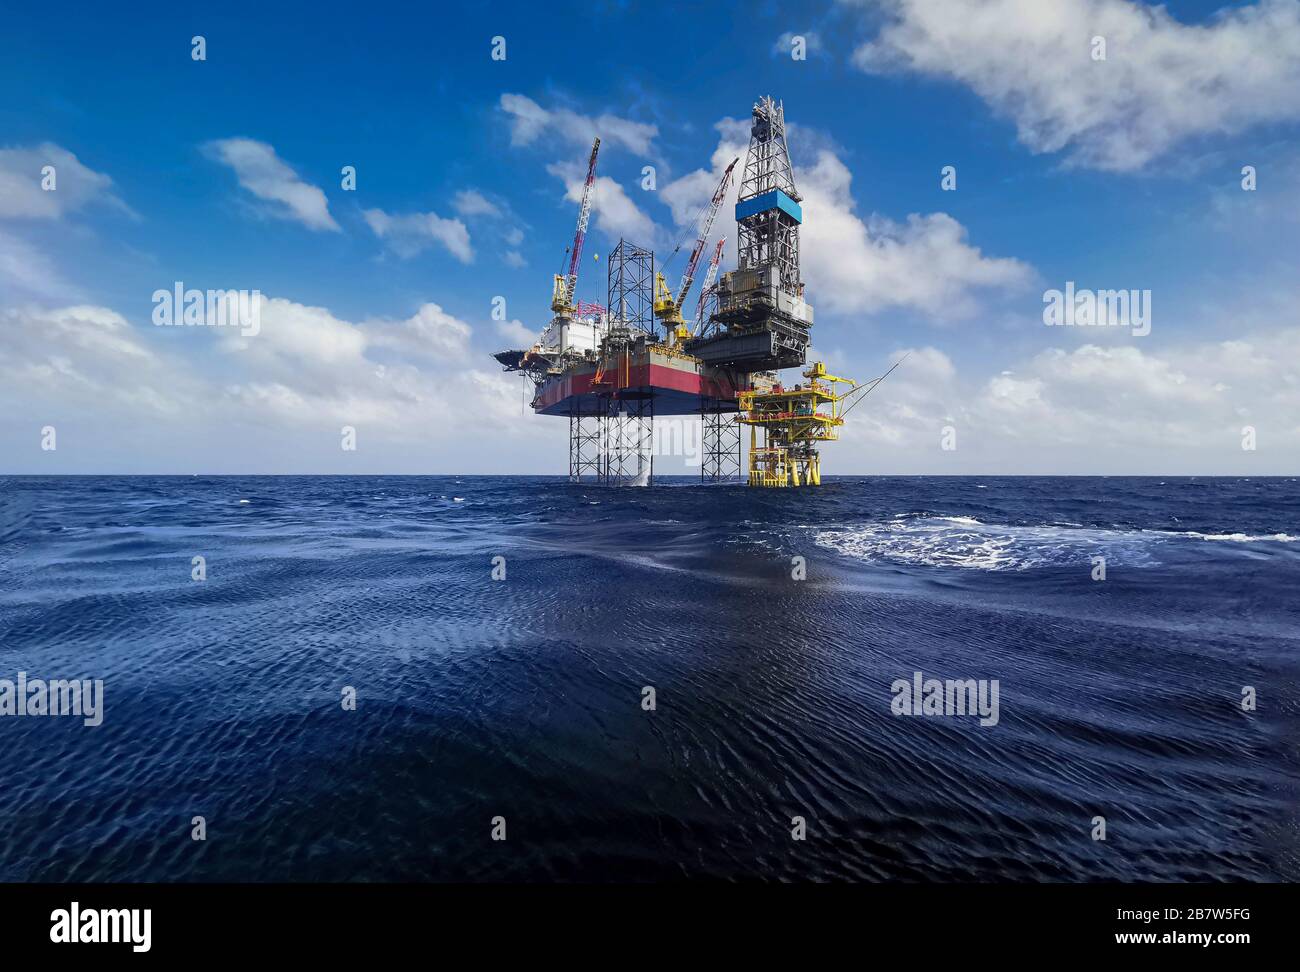 jack up rig with oil platform drilling at oil fields with beautiful blue cloudy sky at ocean Stock Photo